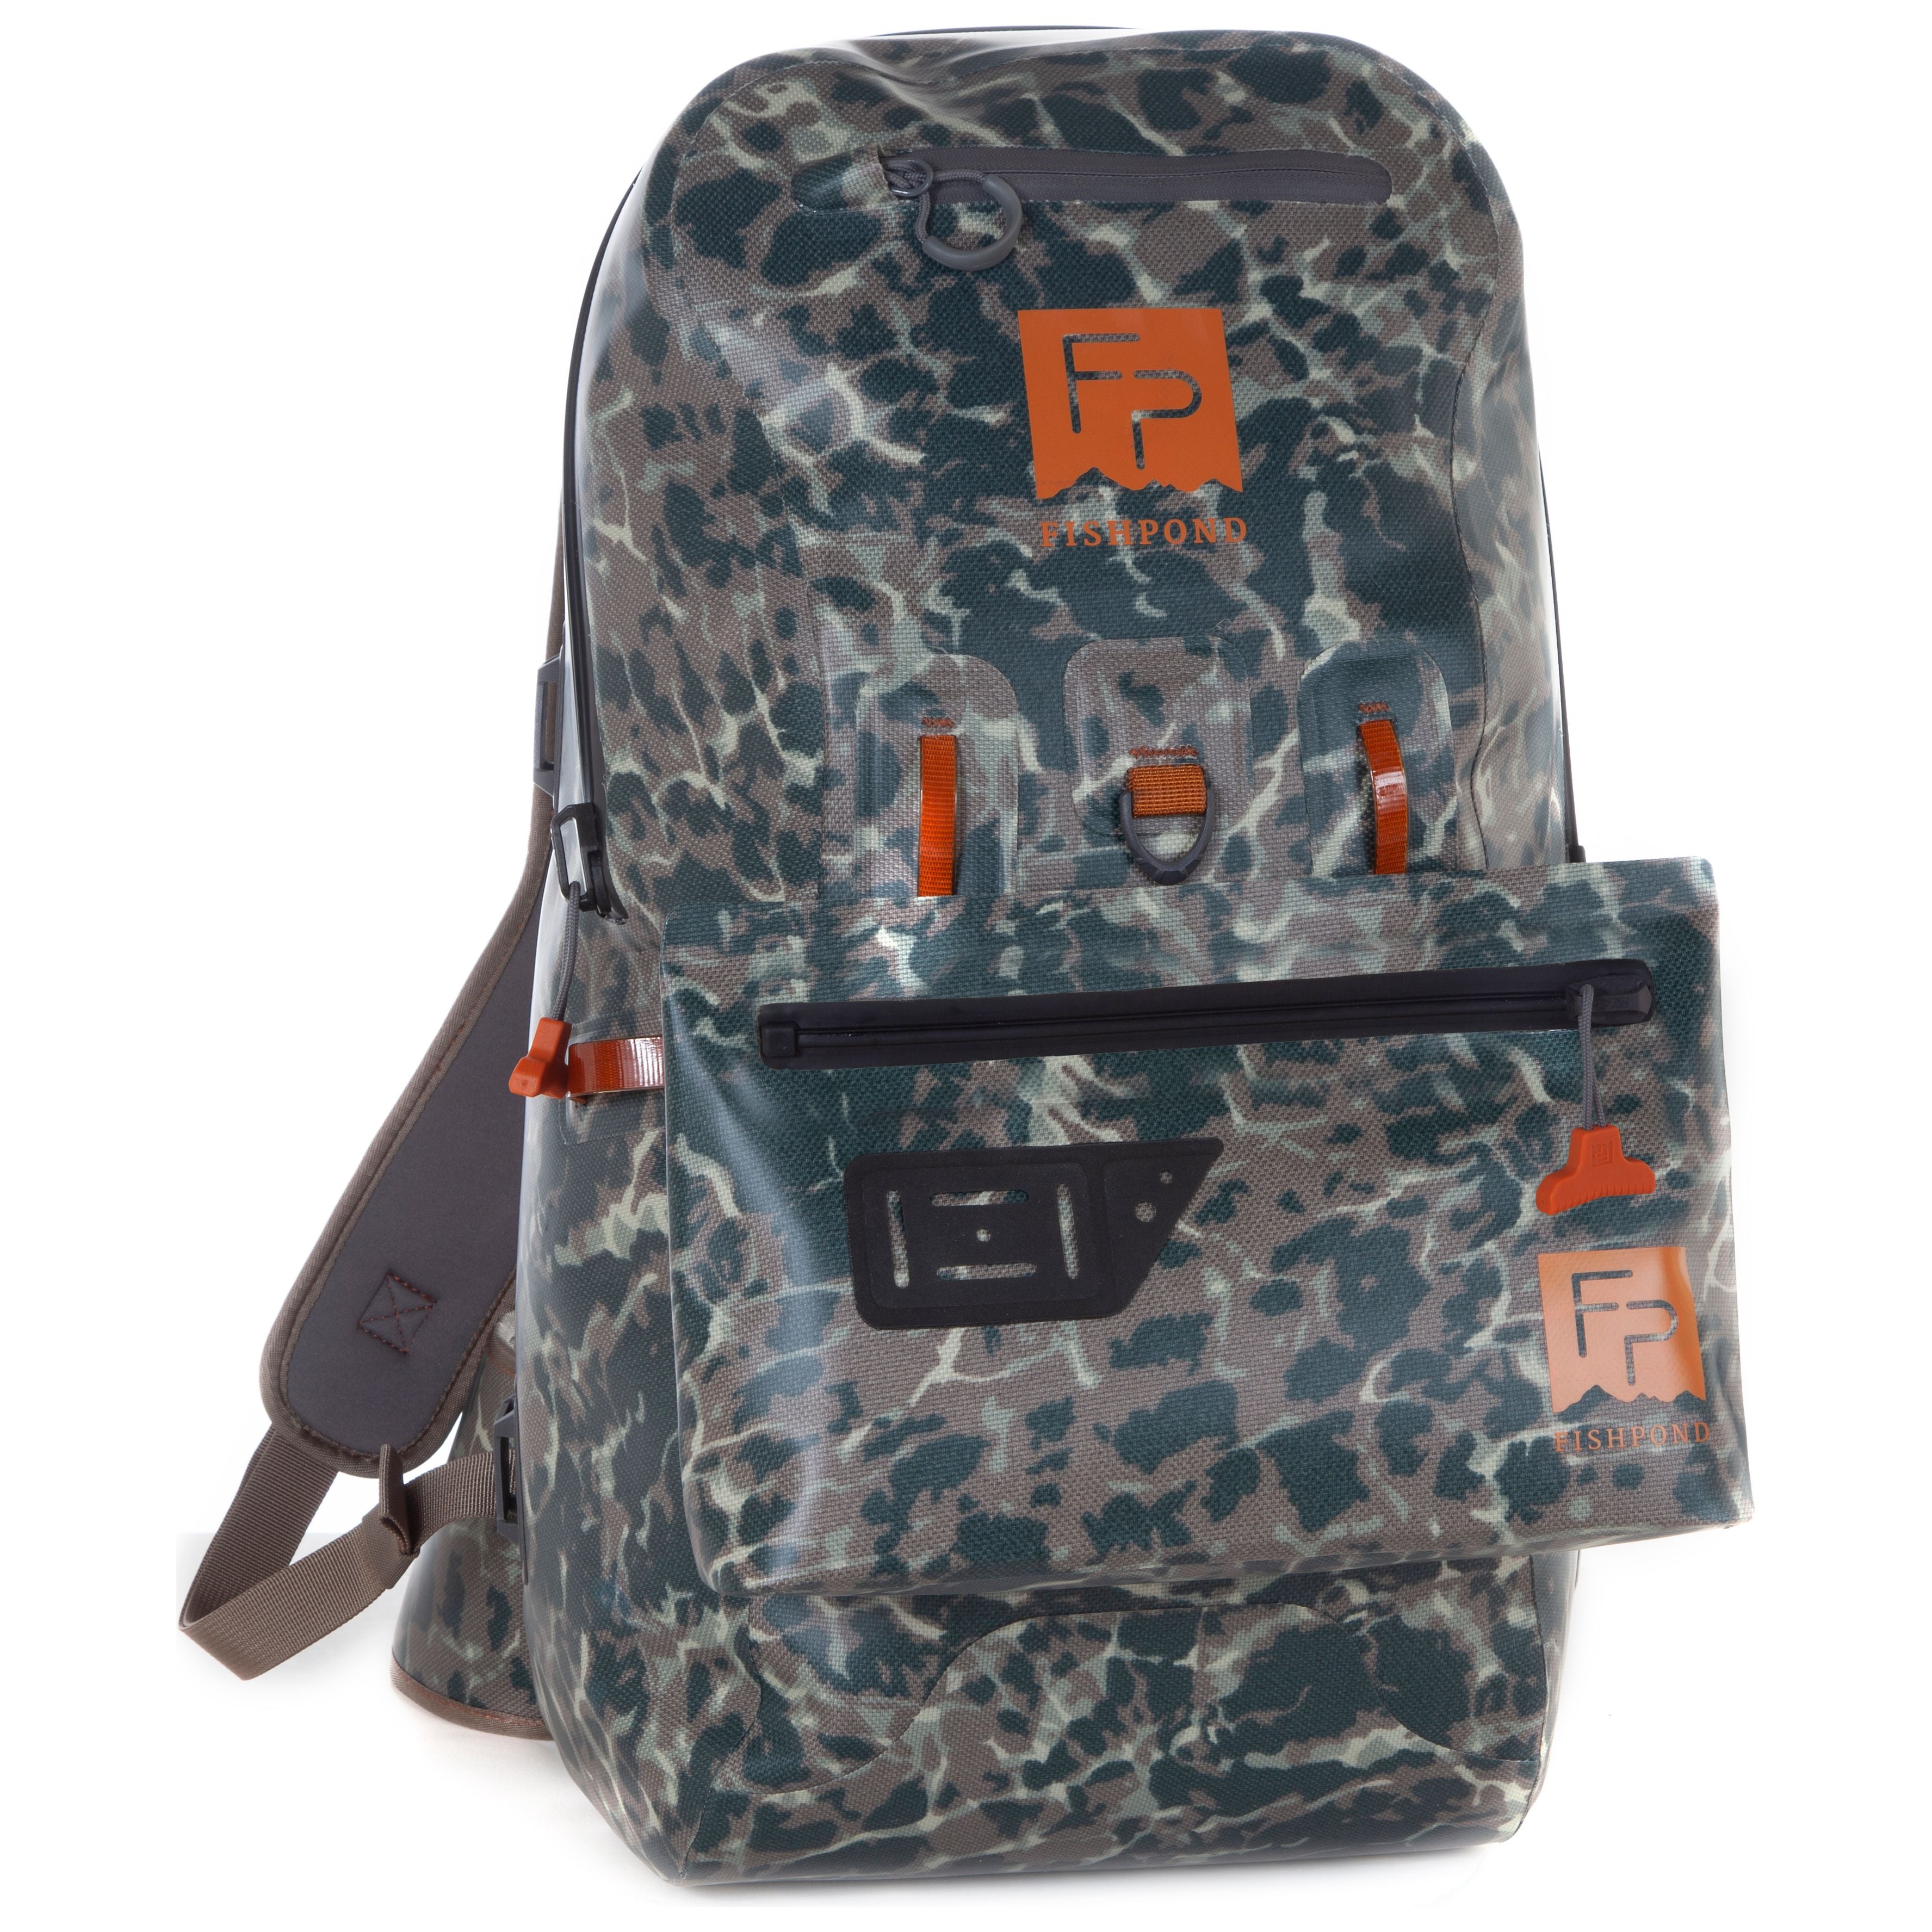 Fishpond Thunderhead Submersible Pouch Eco Riverbed Camo Image 03